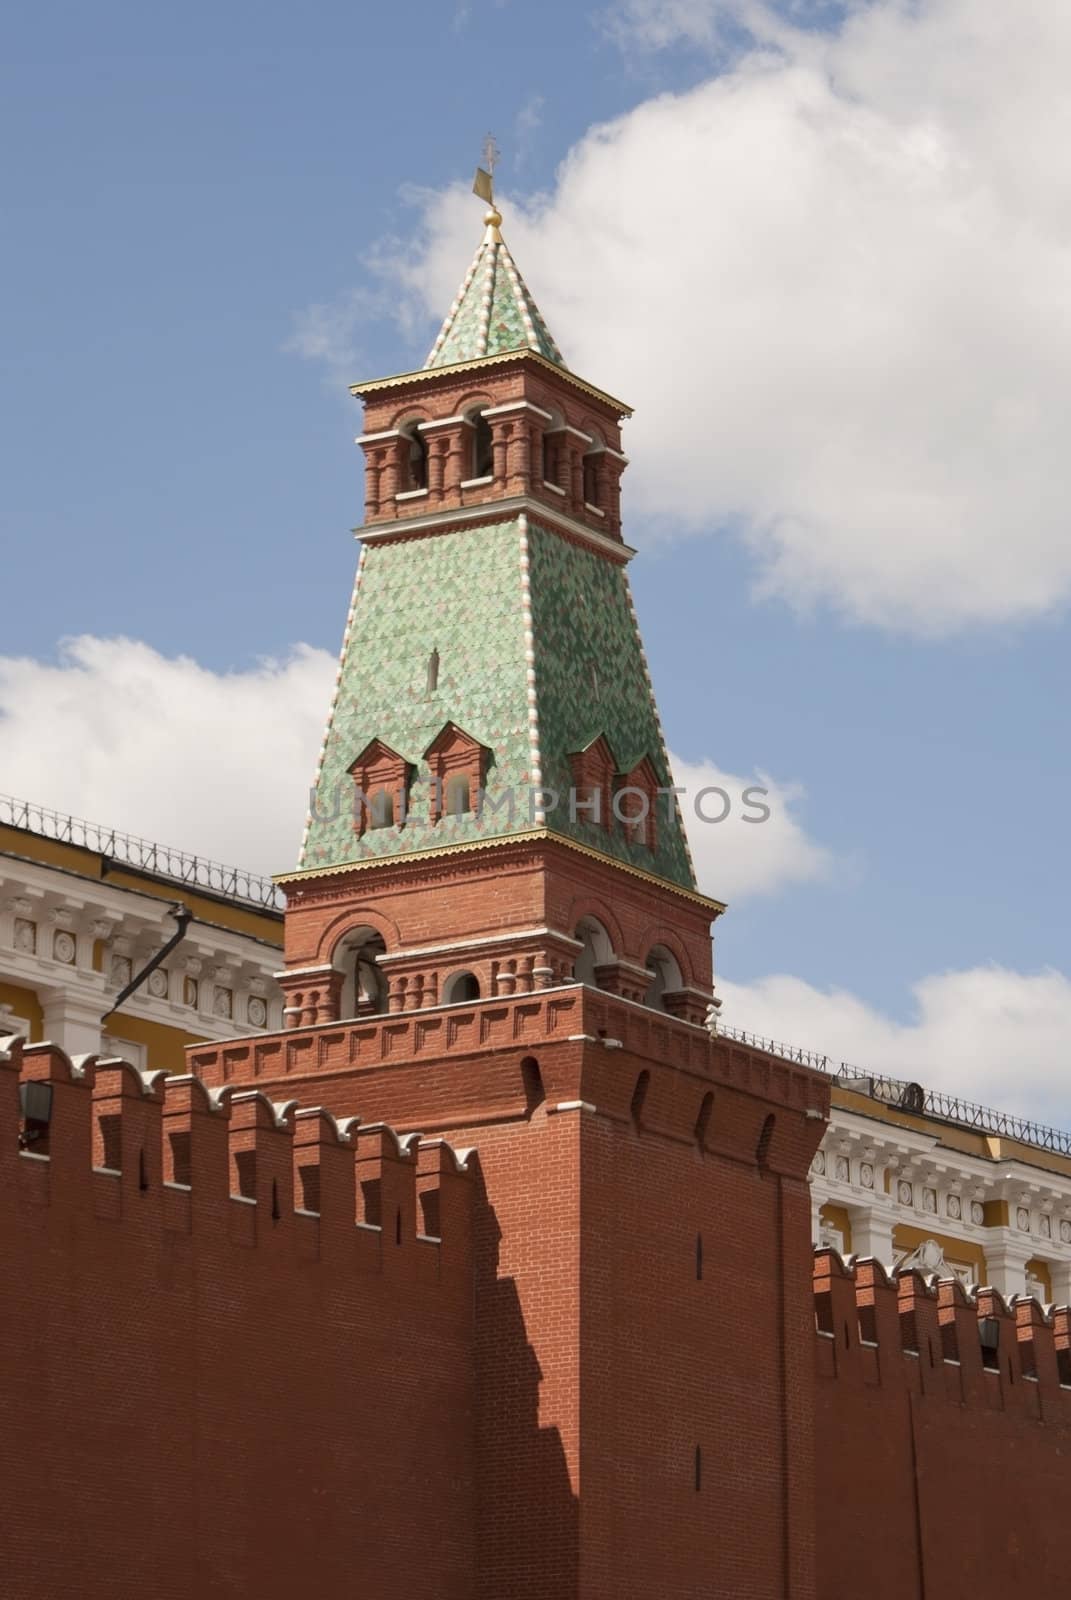 Senatskaya tower at Red Square in Moscow, Russia by AndreyKr